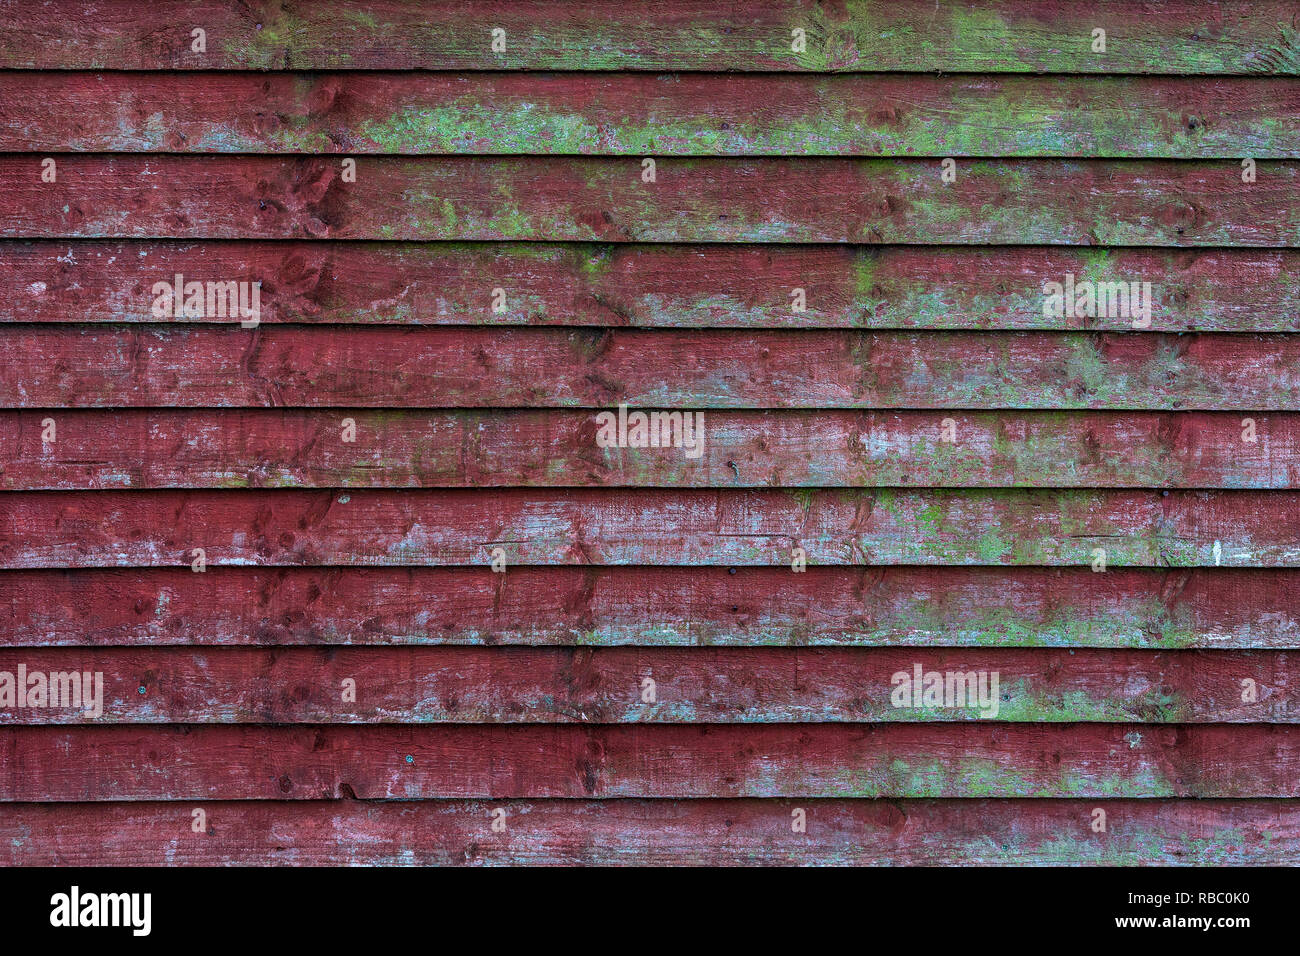 Grunge old red wooden fence with green moss patterns - high quality texture / background Stock Photo